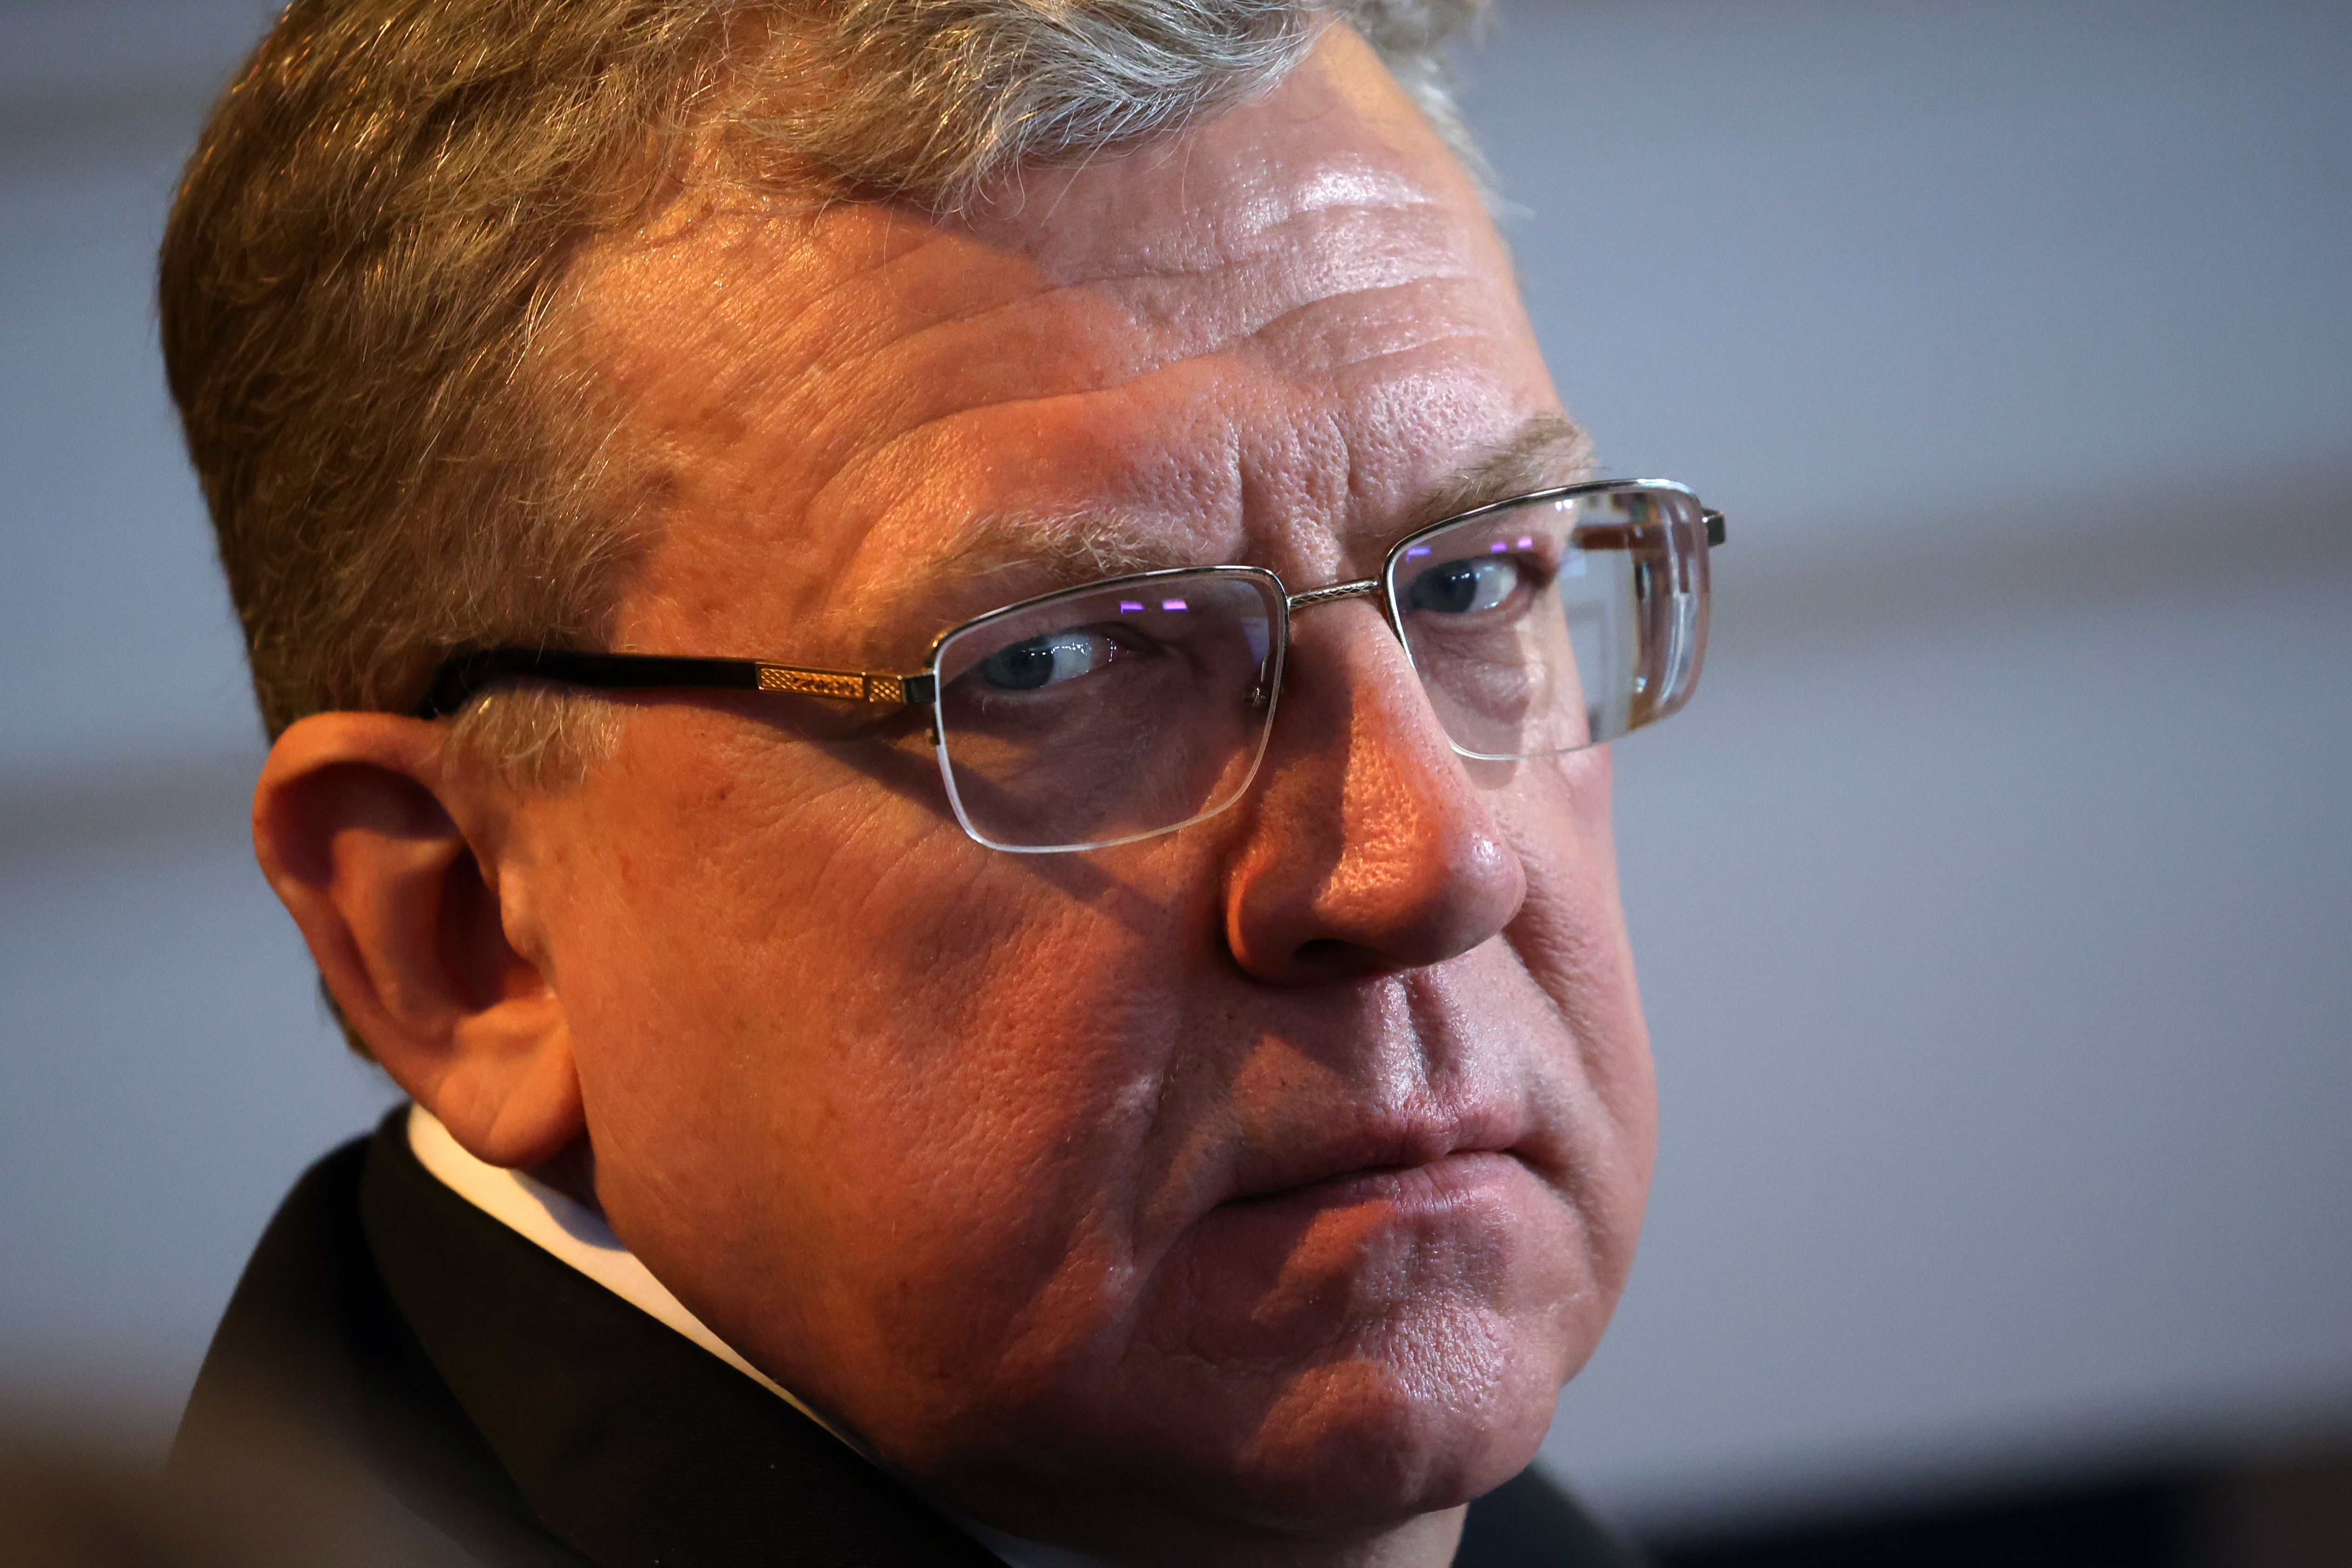 15 january, DEFICIENCIES OF OUR TIME: TRUST. UNDERSTANDING. SENSE. Alexey Kudrin, Chairman, Accounts Chamber of the Russian Federation. Vladimir Gerdo/TASS